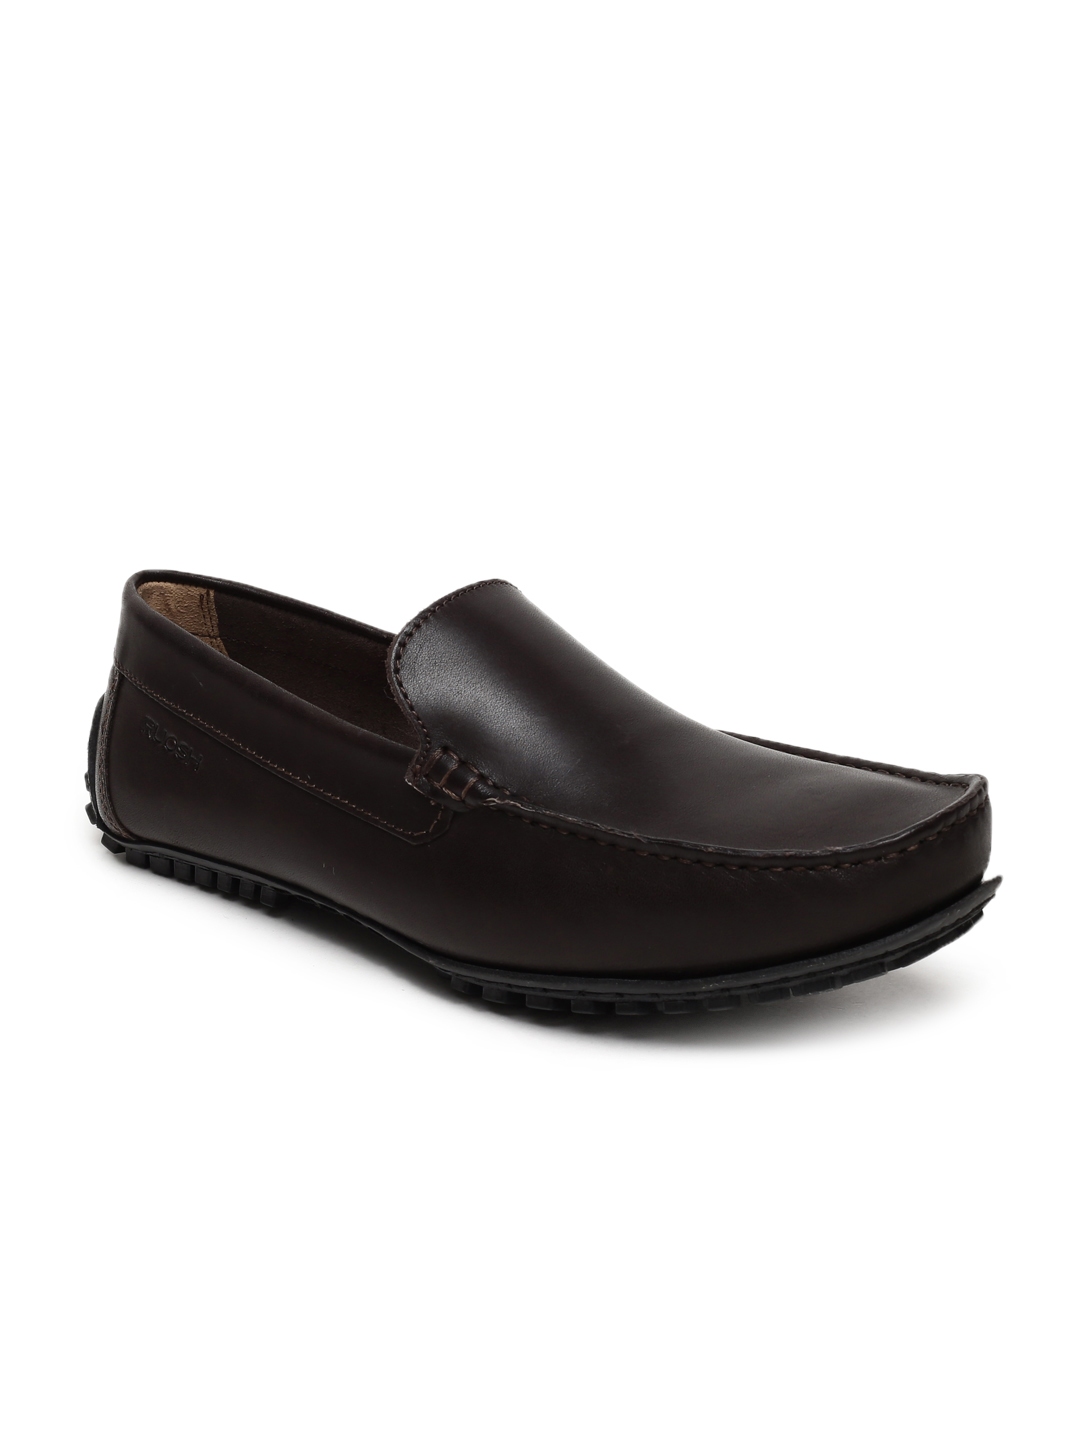 Buy Ruosh Men Black Leather Loafers - Casual Shoes for Men 6622228 | Myntra